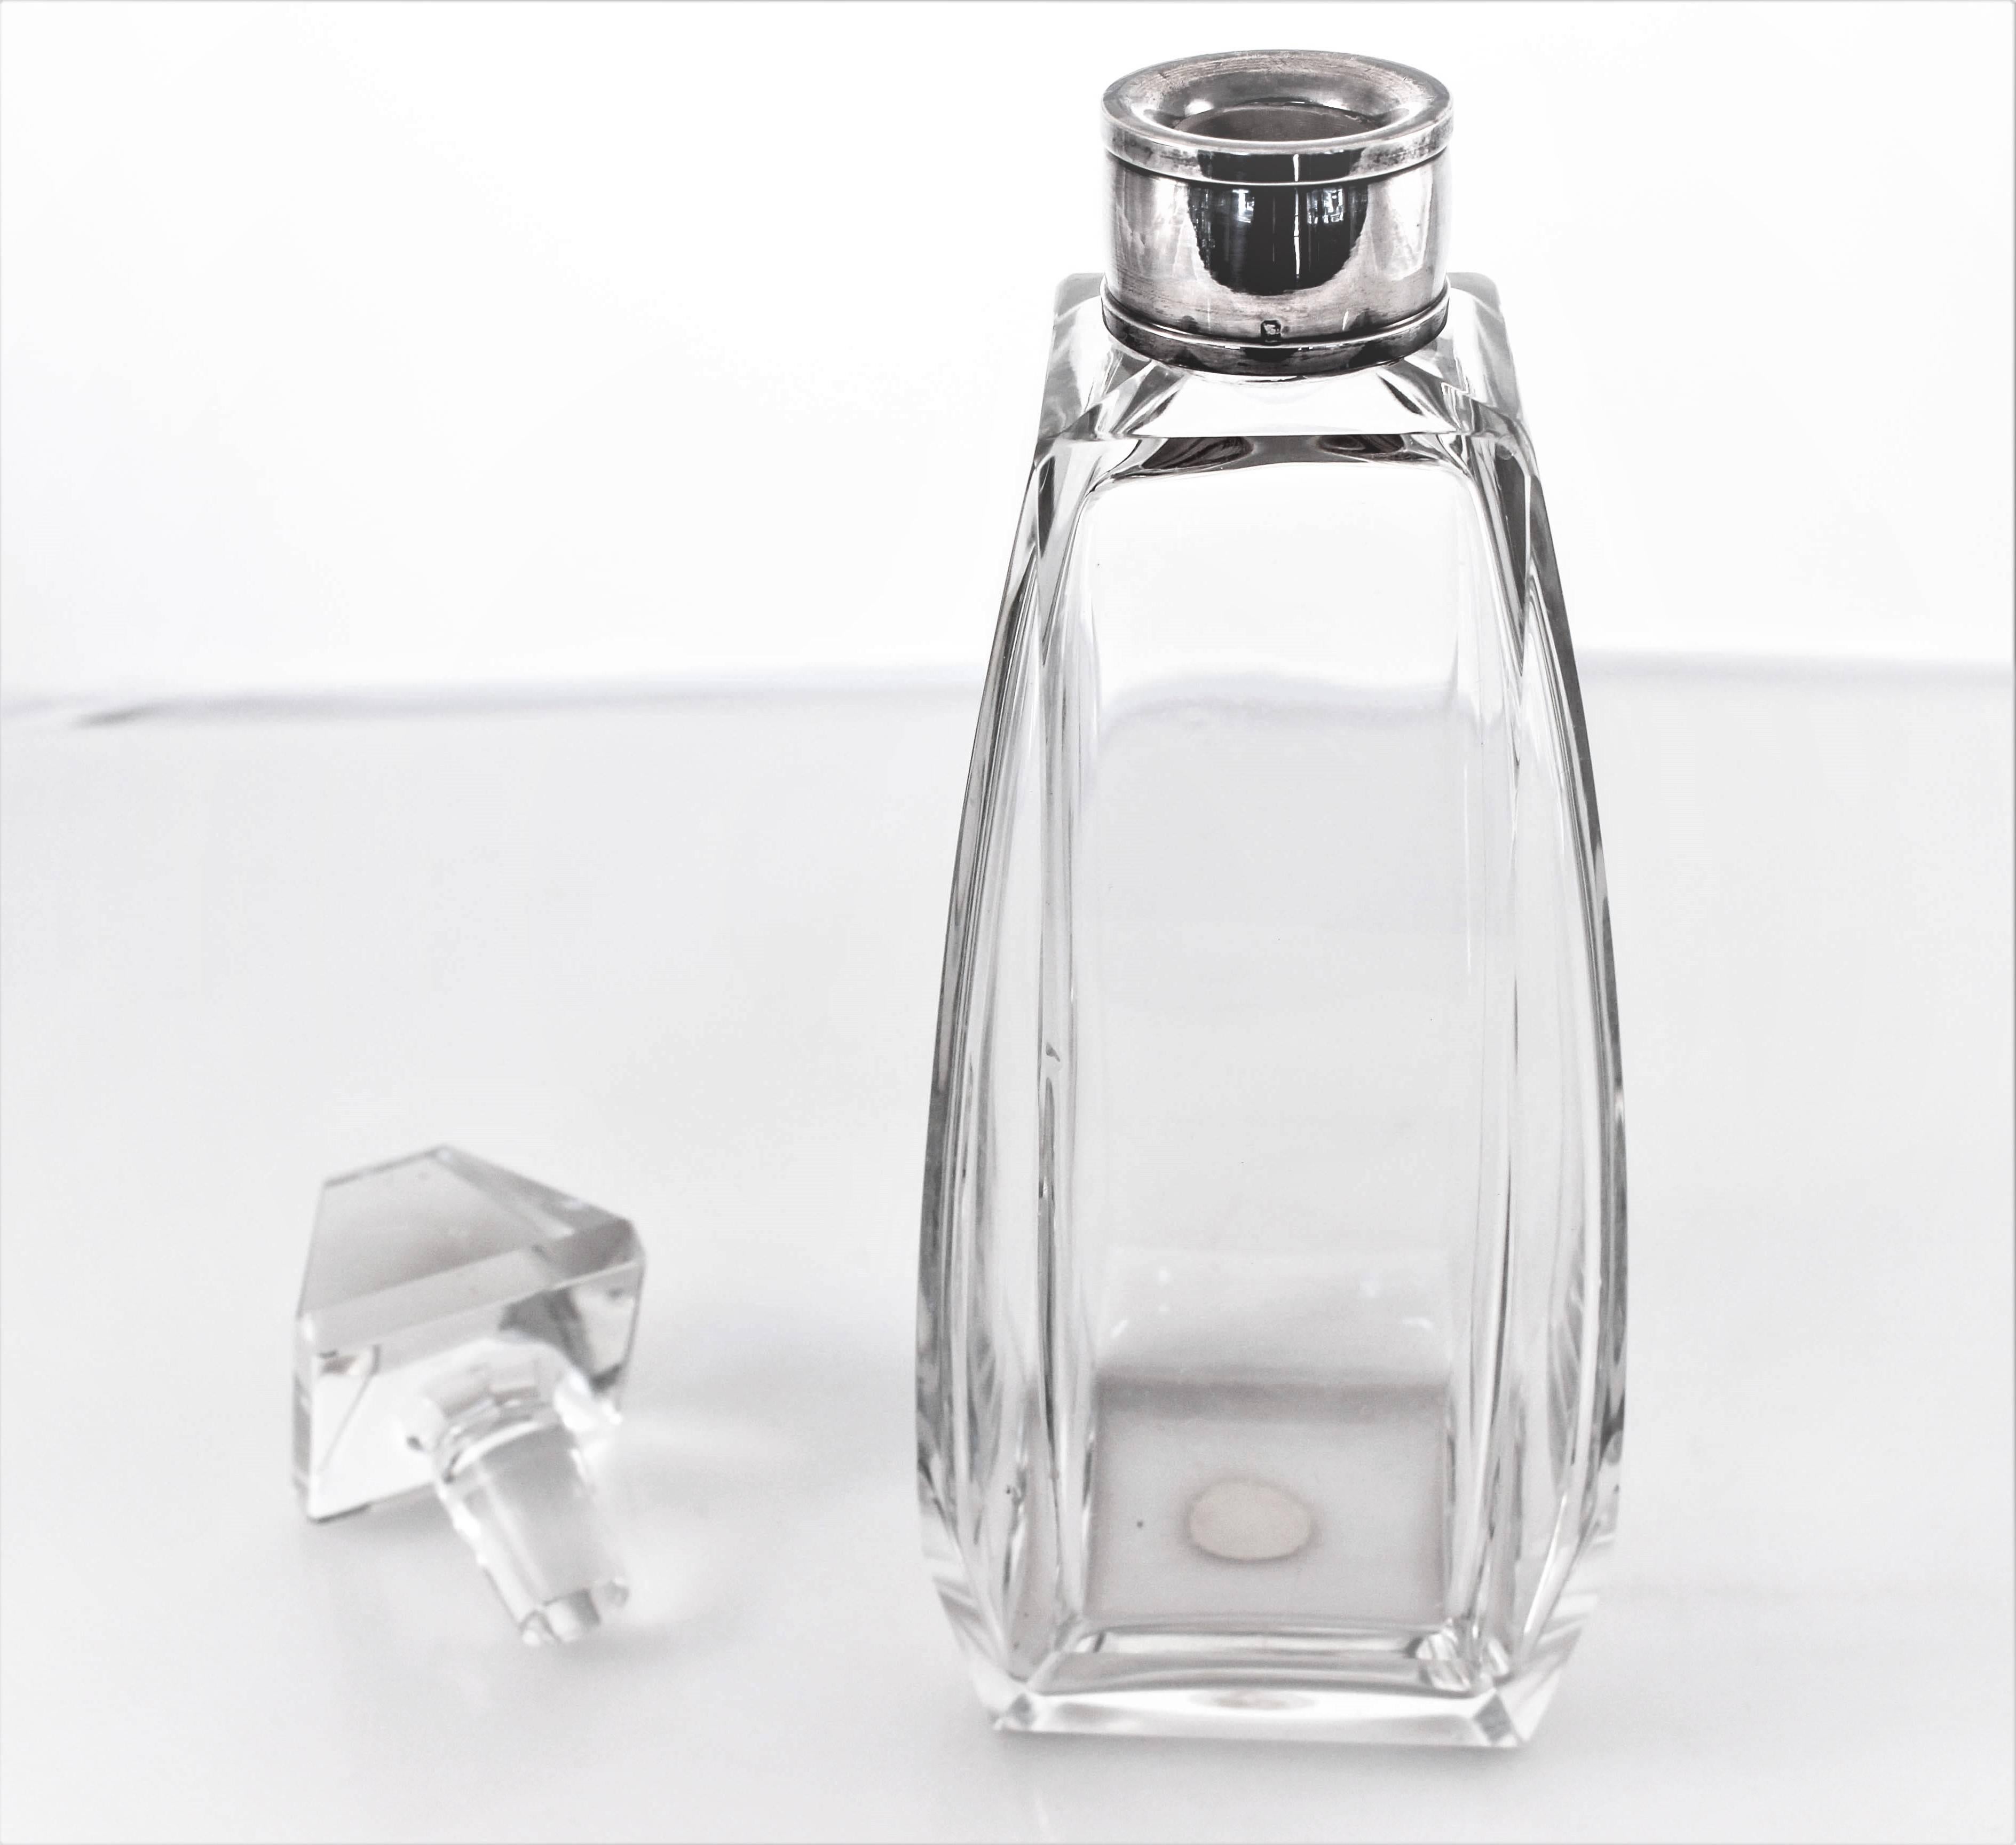 This unusual shaped decanter would be a nice addition to your bar set. Unlike most decanters that are round, this one is square, yes square. Four sided bottle with the original stopper that is four sided too. Manufactured in Germany during the